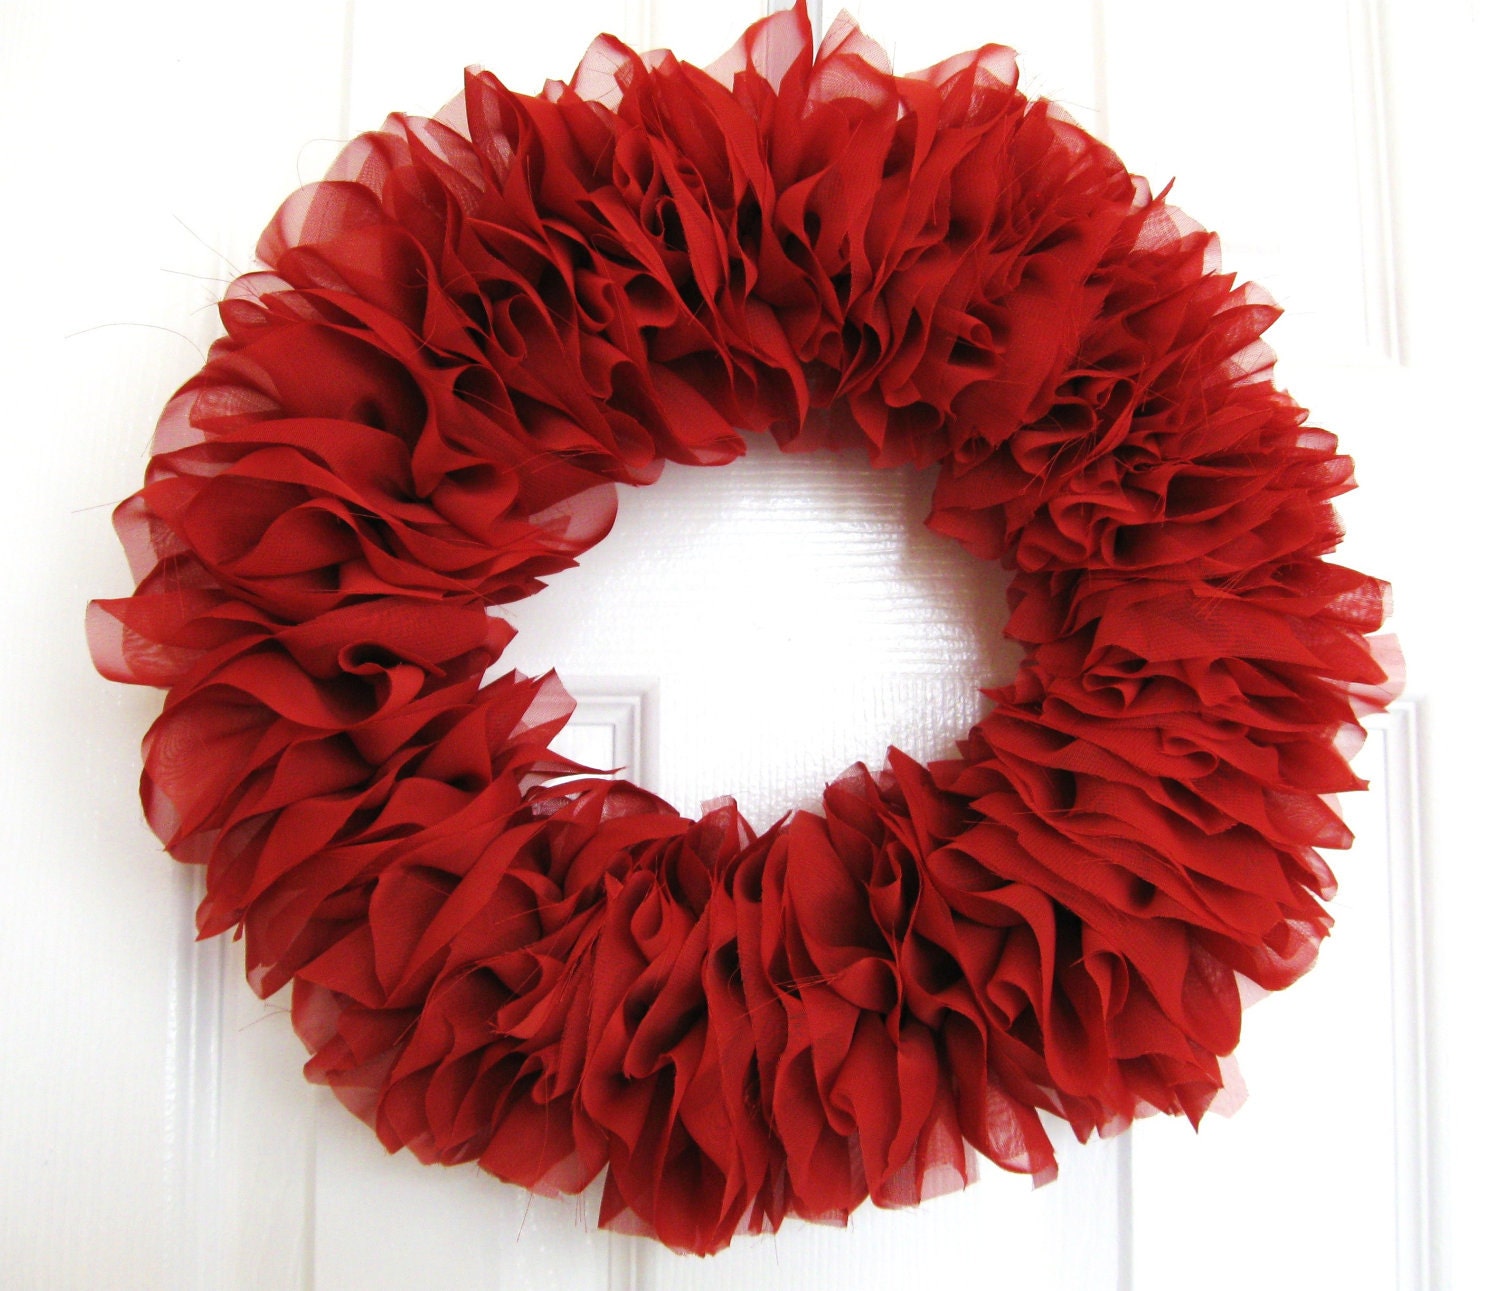 Rust Chiffon Ruffle Wreath Shabby Chic - featured on the Gift Insider - as seen on TV